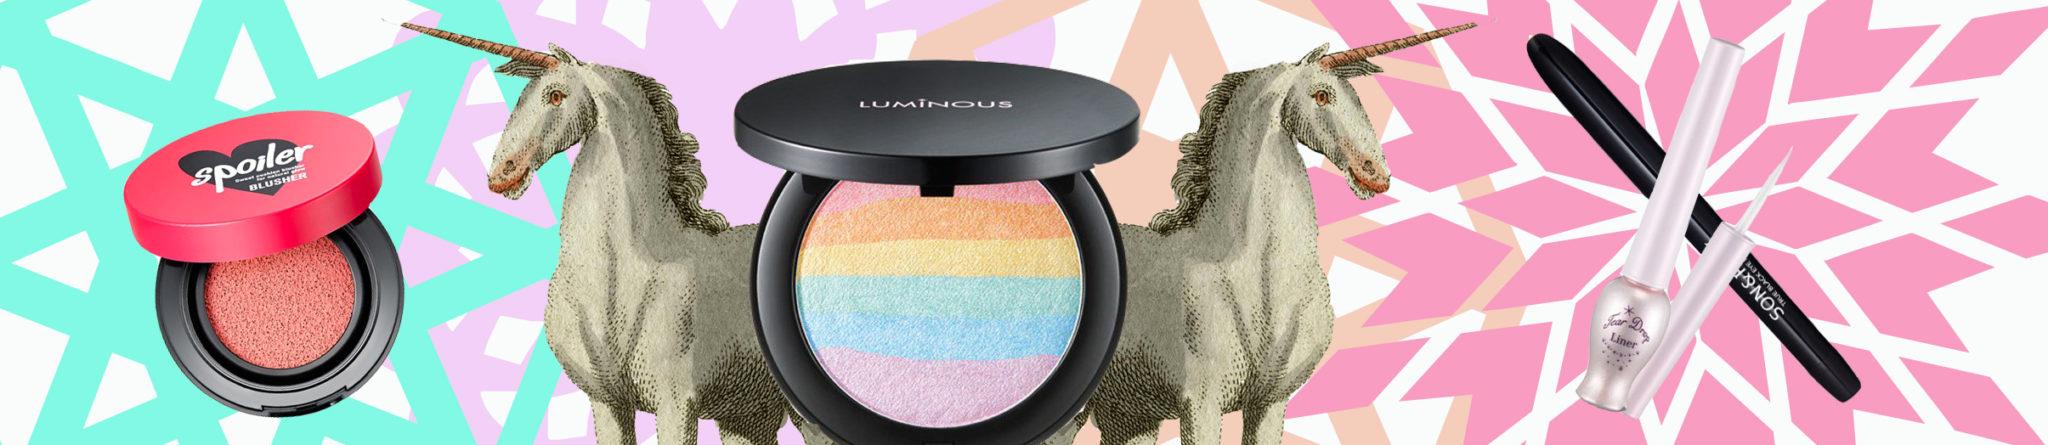 This Easy Unicorn Makeup Look Will Make You the Star of the Show